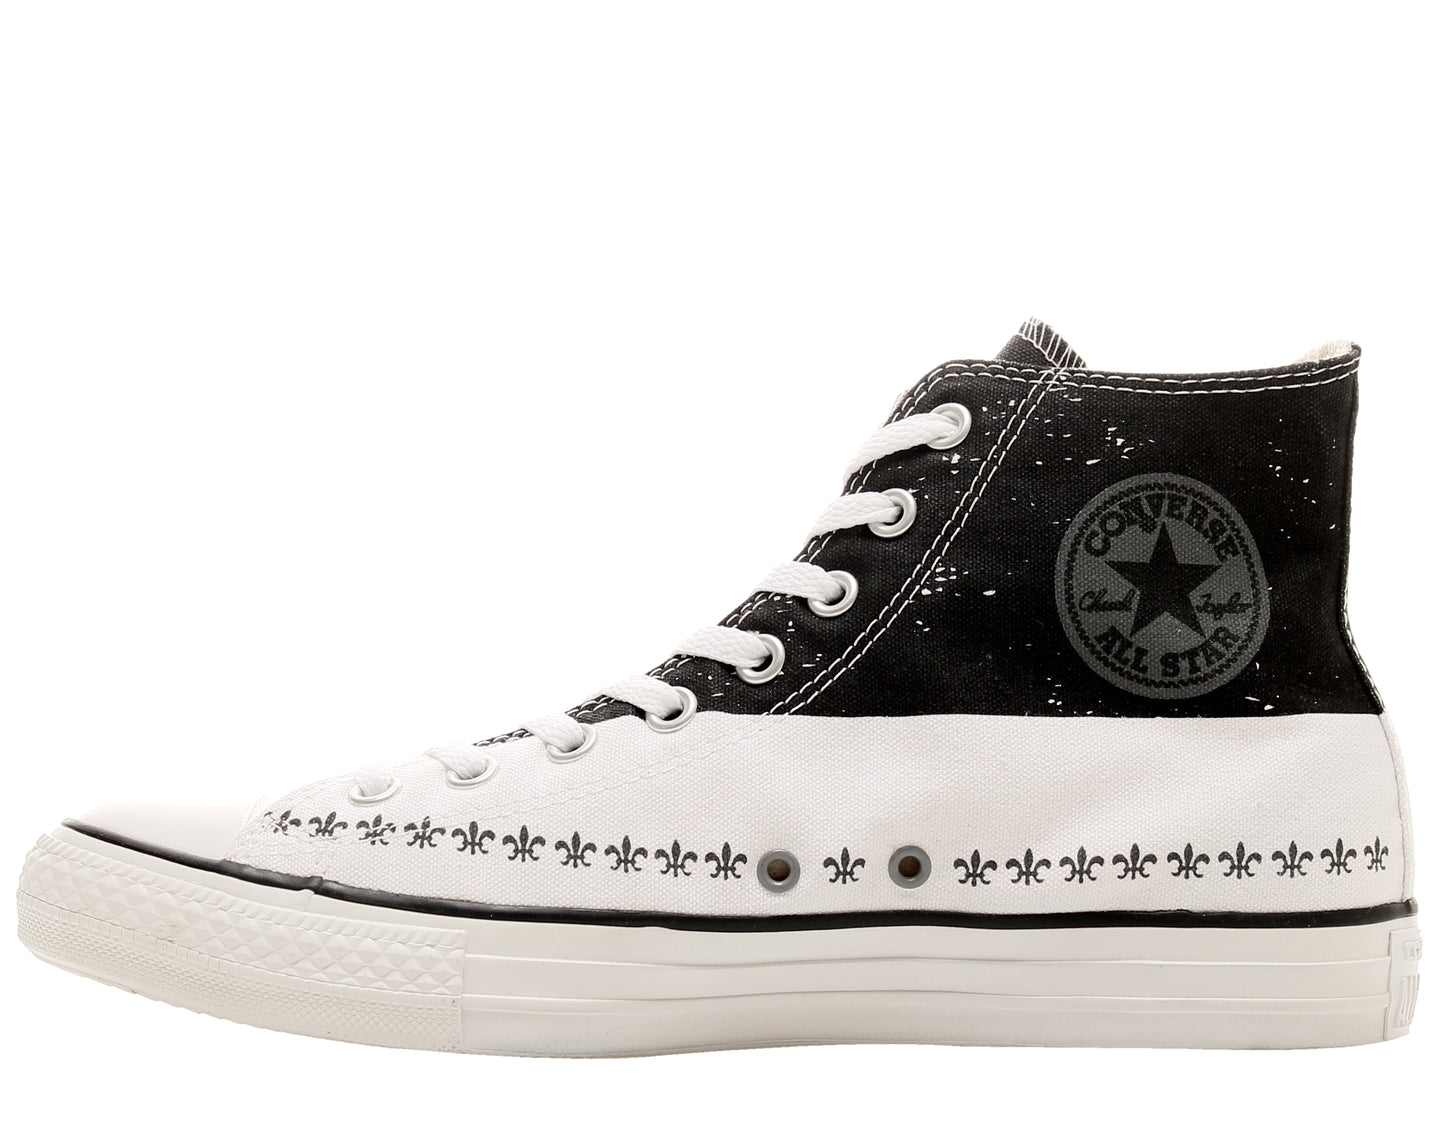 Converse Chuck Taylor All Star High Top Andy Warhol Men's Sneakers